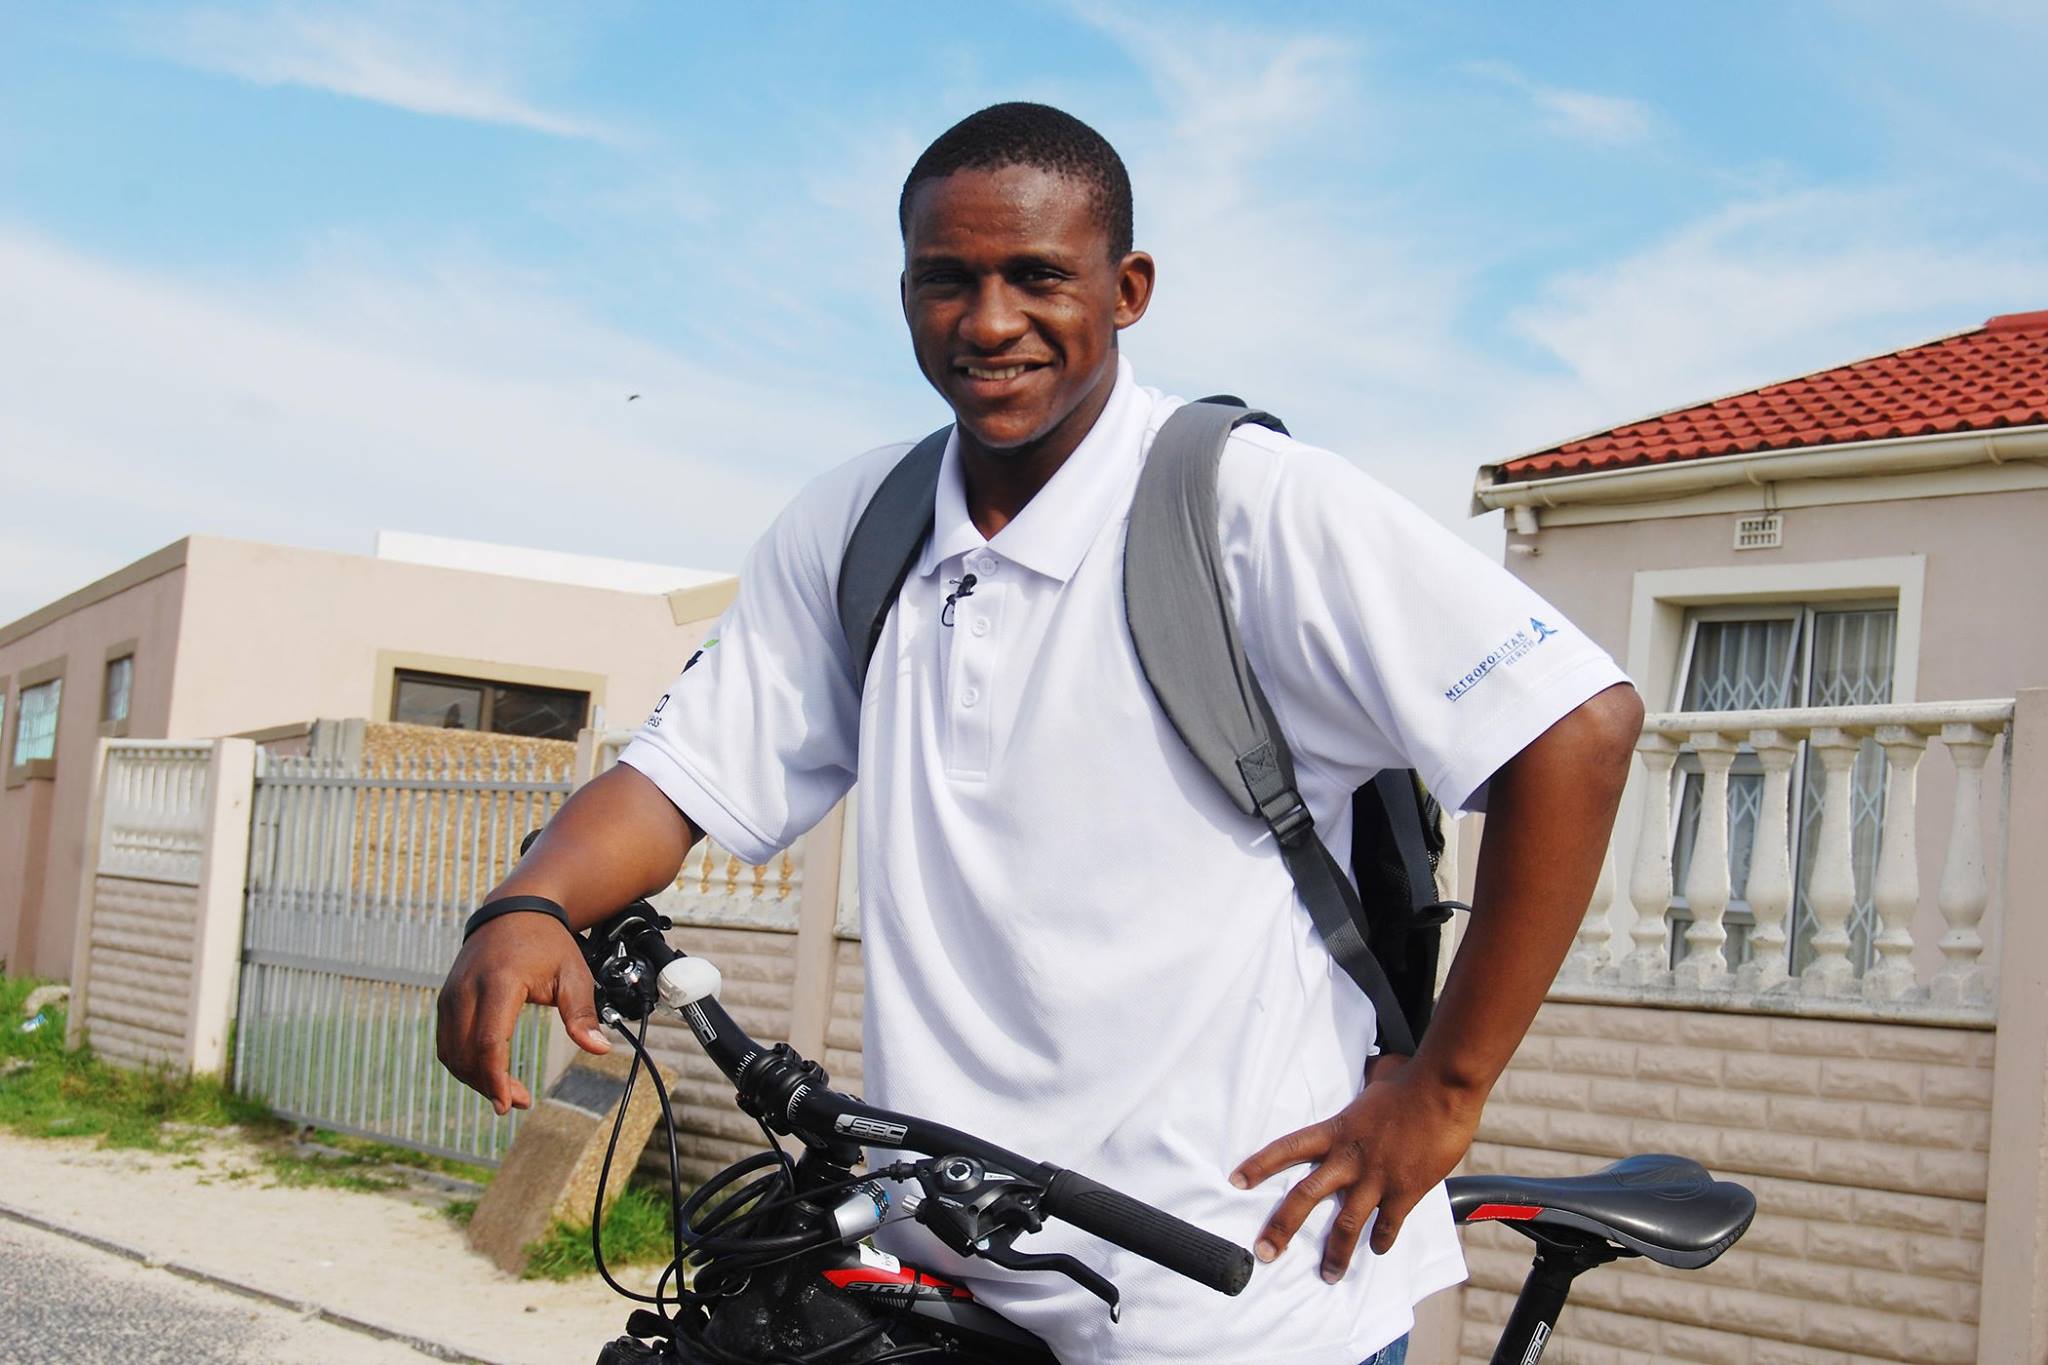 Iyeza Express - This Young South African is Making a Difference... One Delivery At a Time!